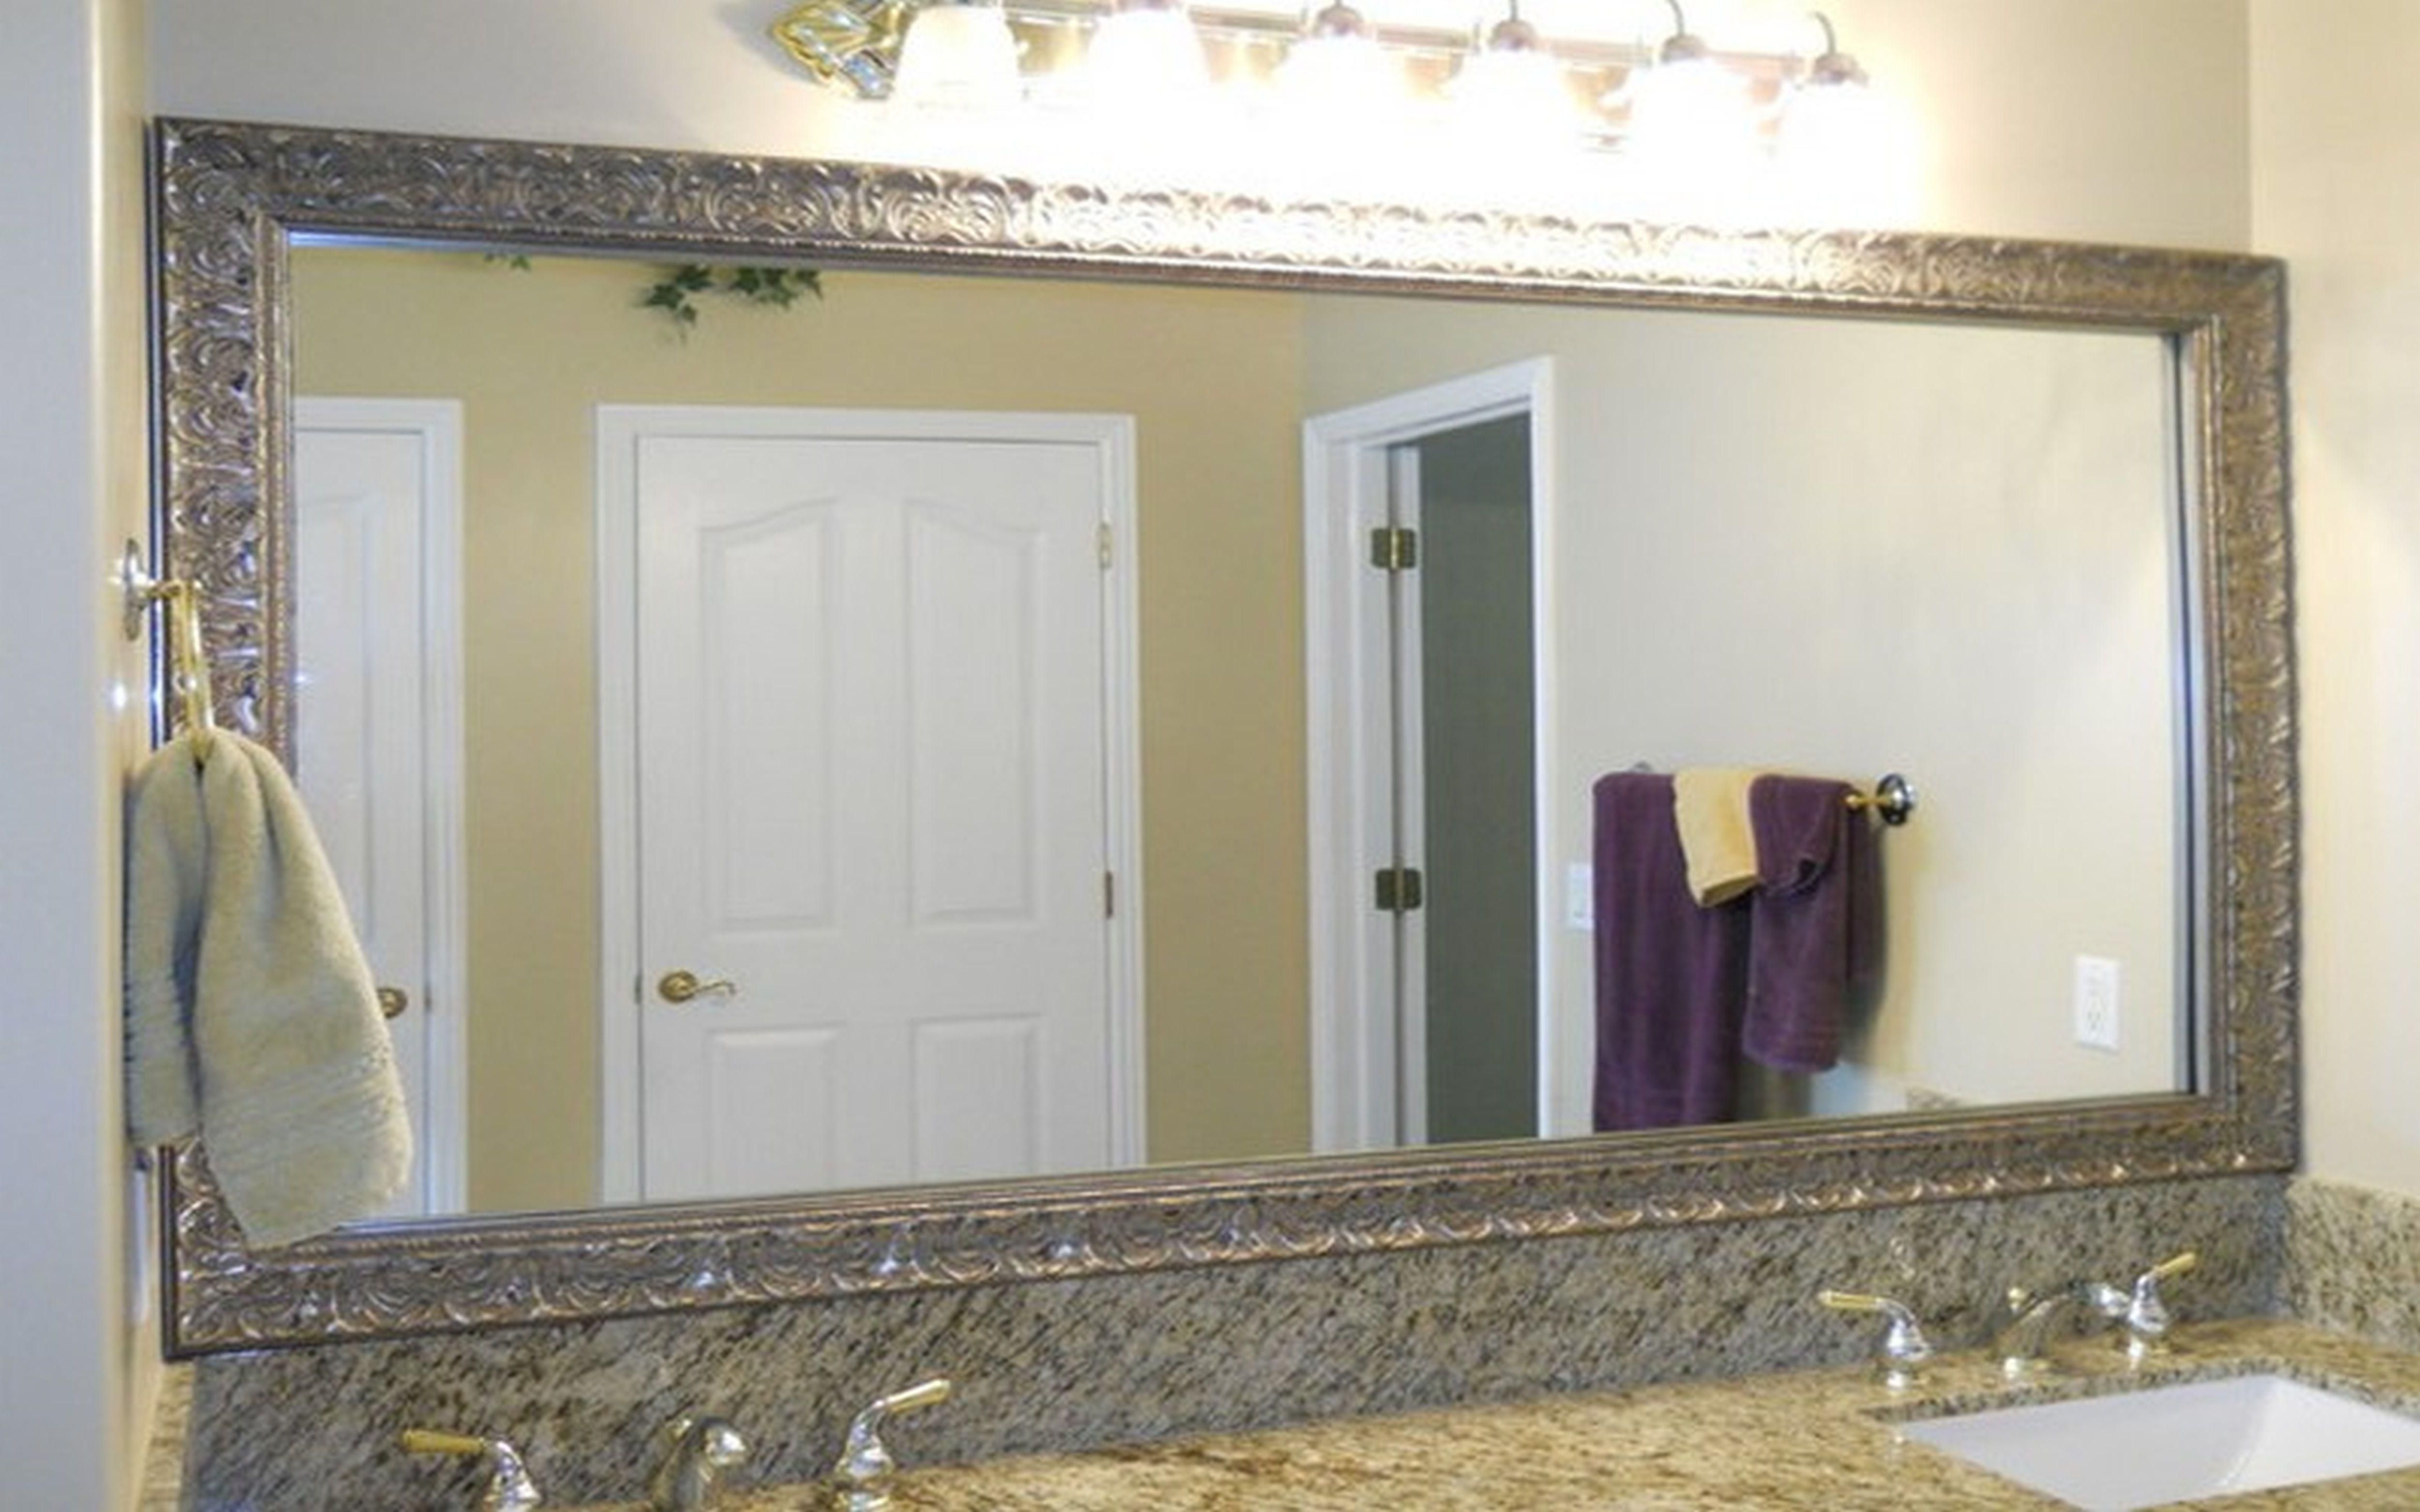 Bathroom Furniture Wall Mirrors And Gold Rustic Ideas Framed For In Large Mirrors For Bathroom Walls (View 17 of 20)